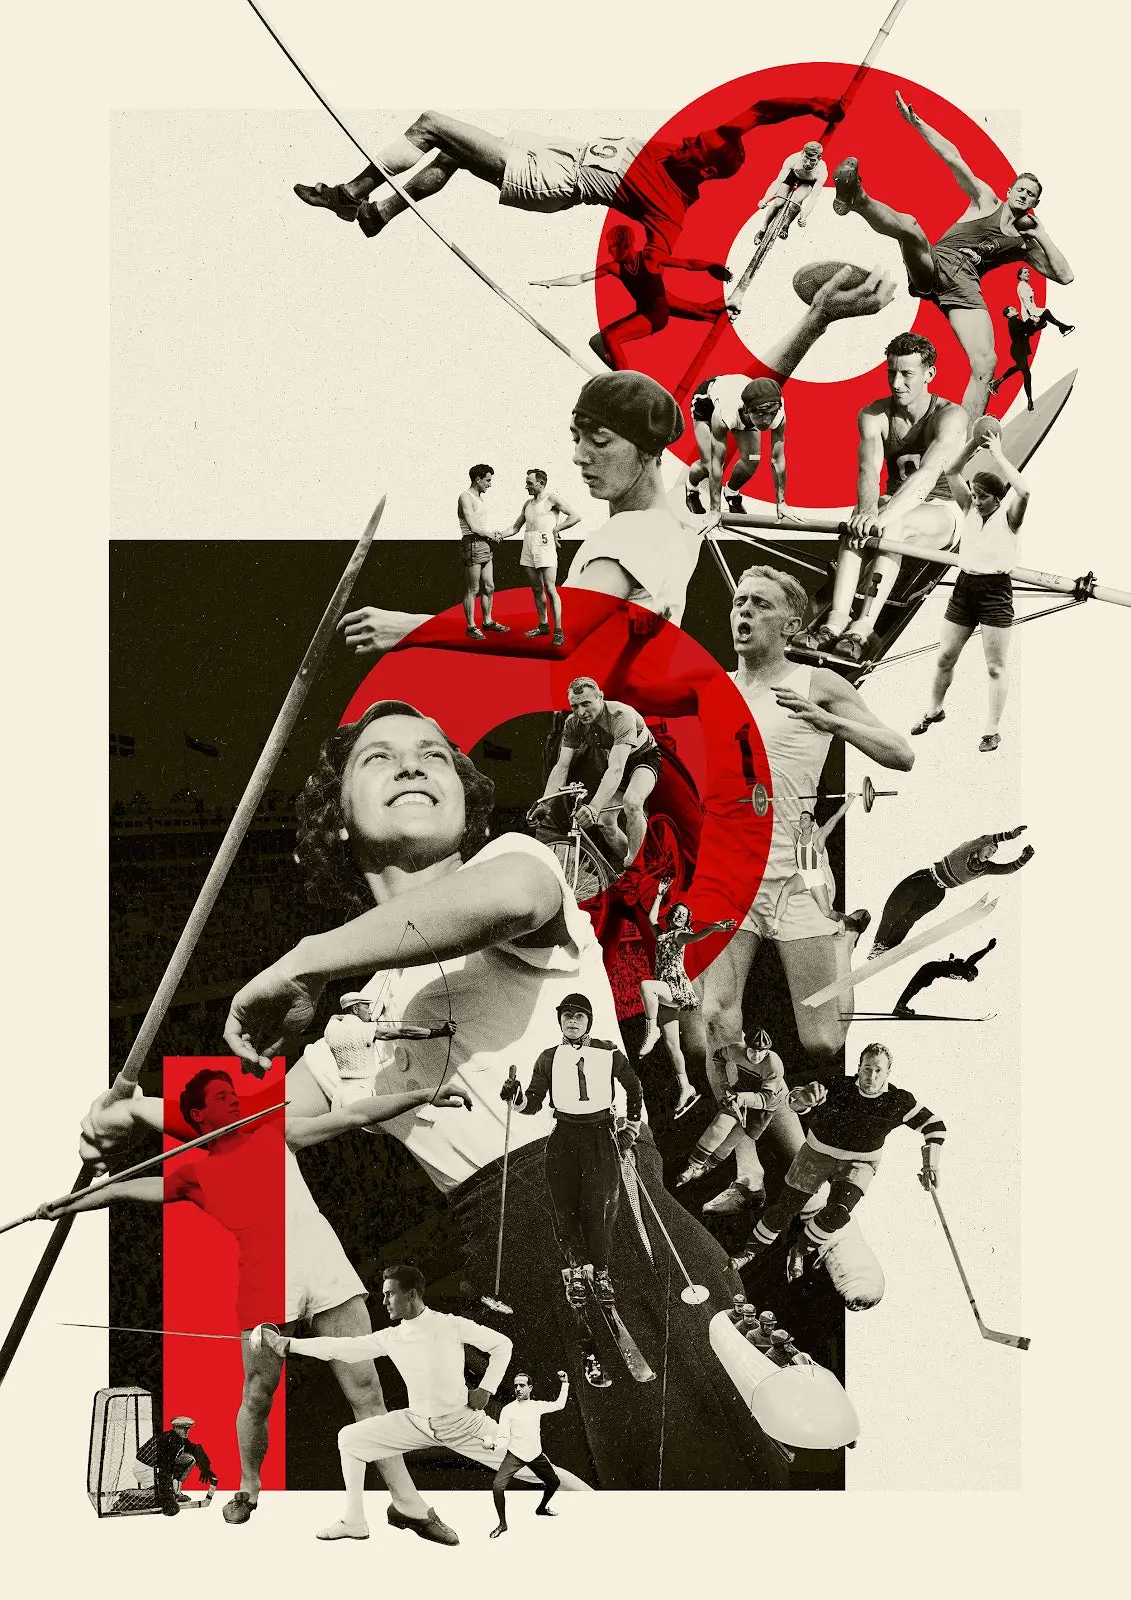 An artistic Olympic themed collage created by Ewelina Karpowiak in Adobe Photoshop.